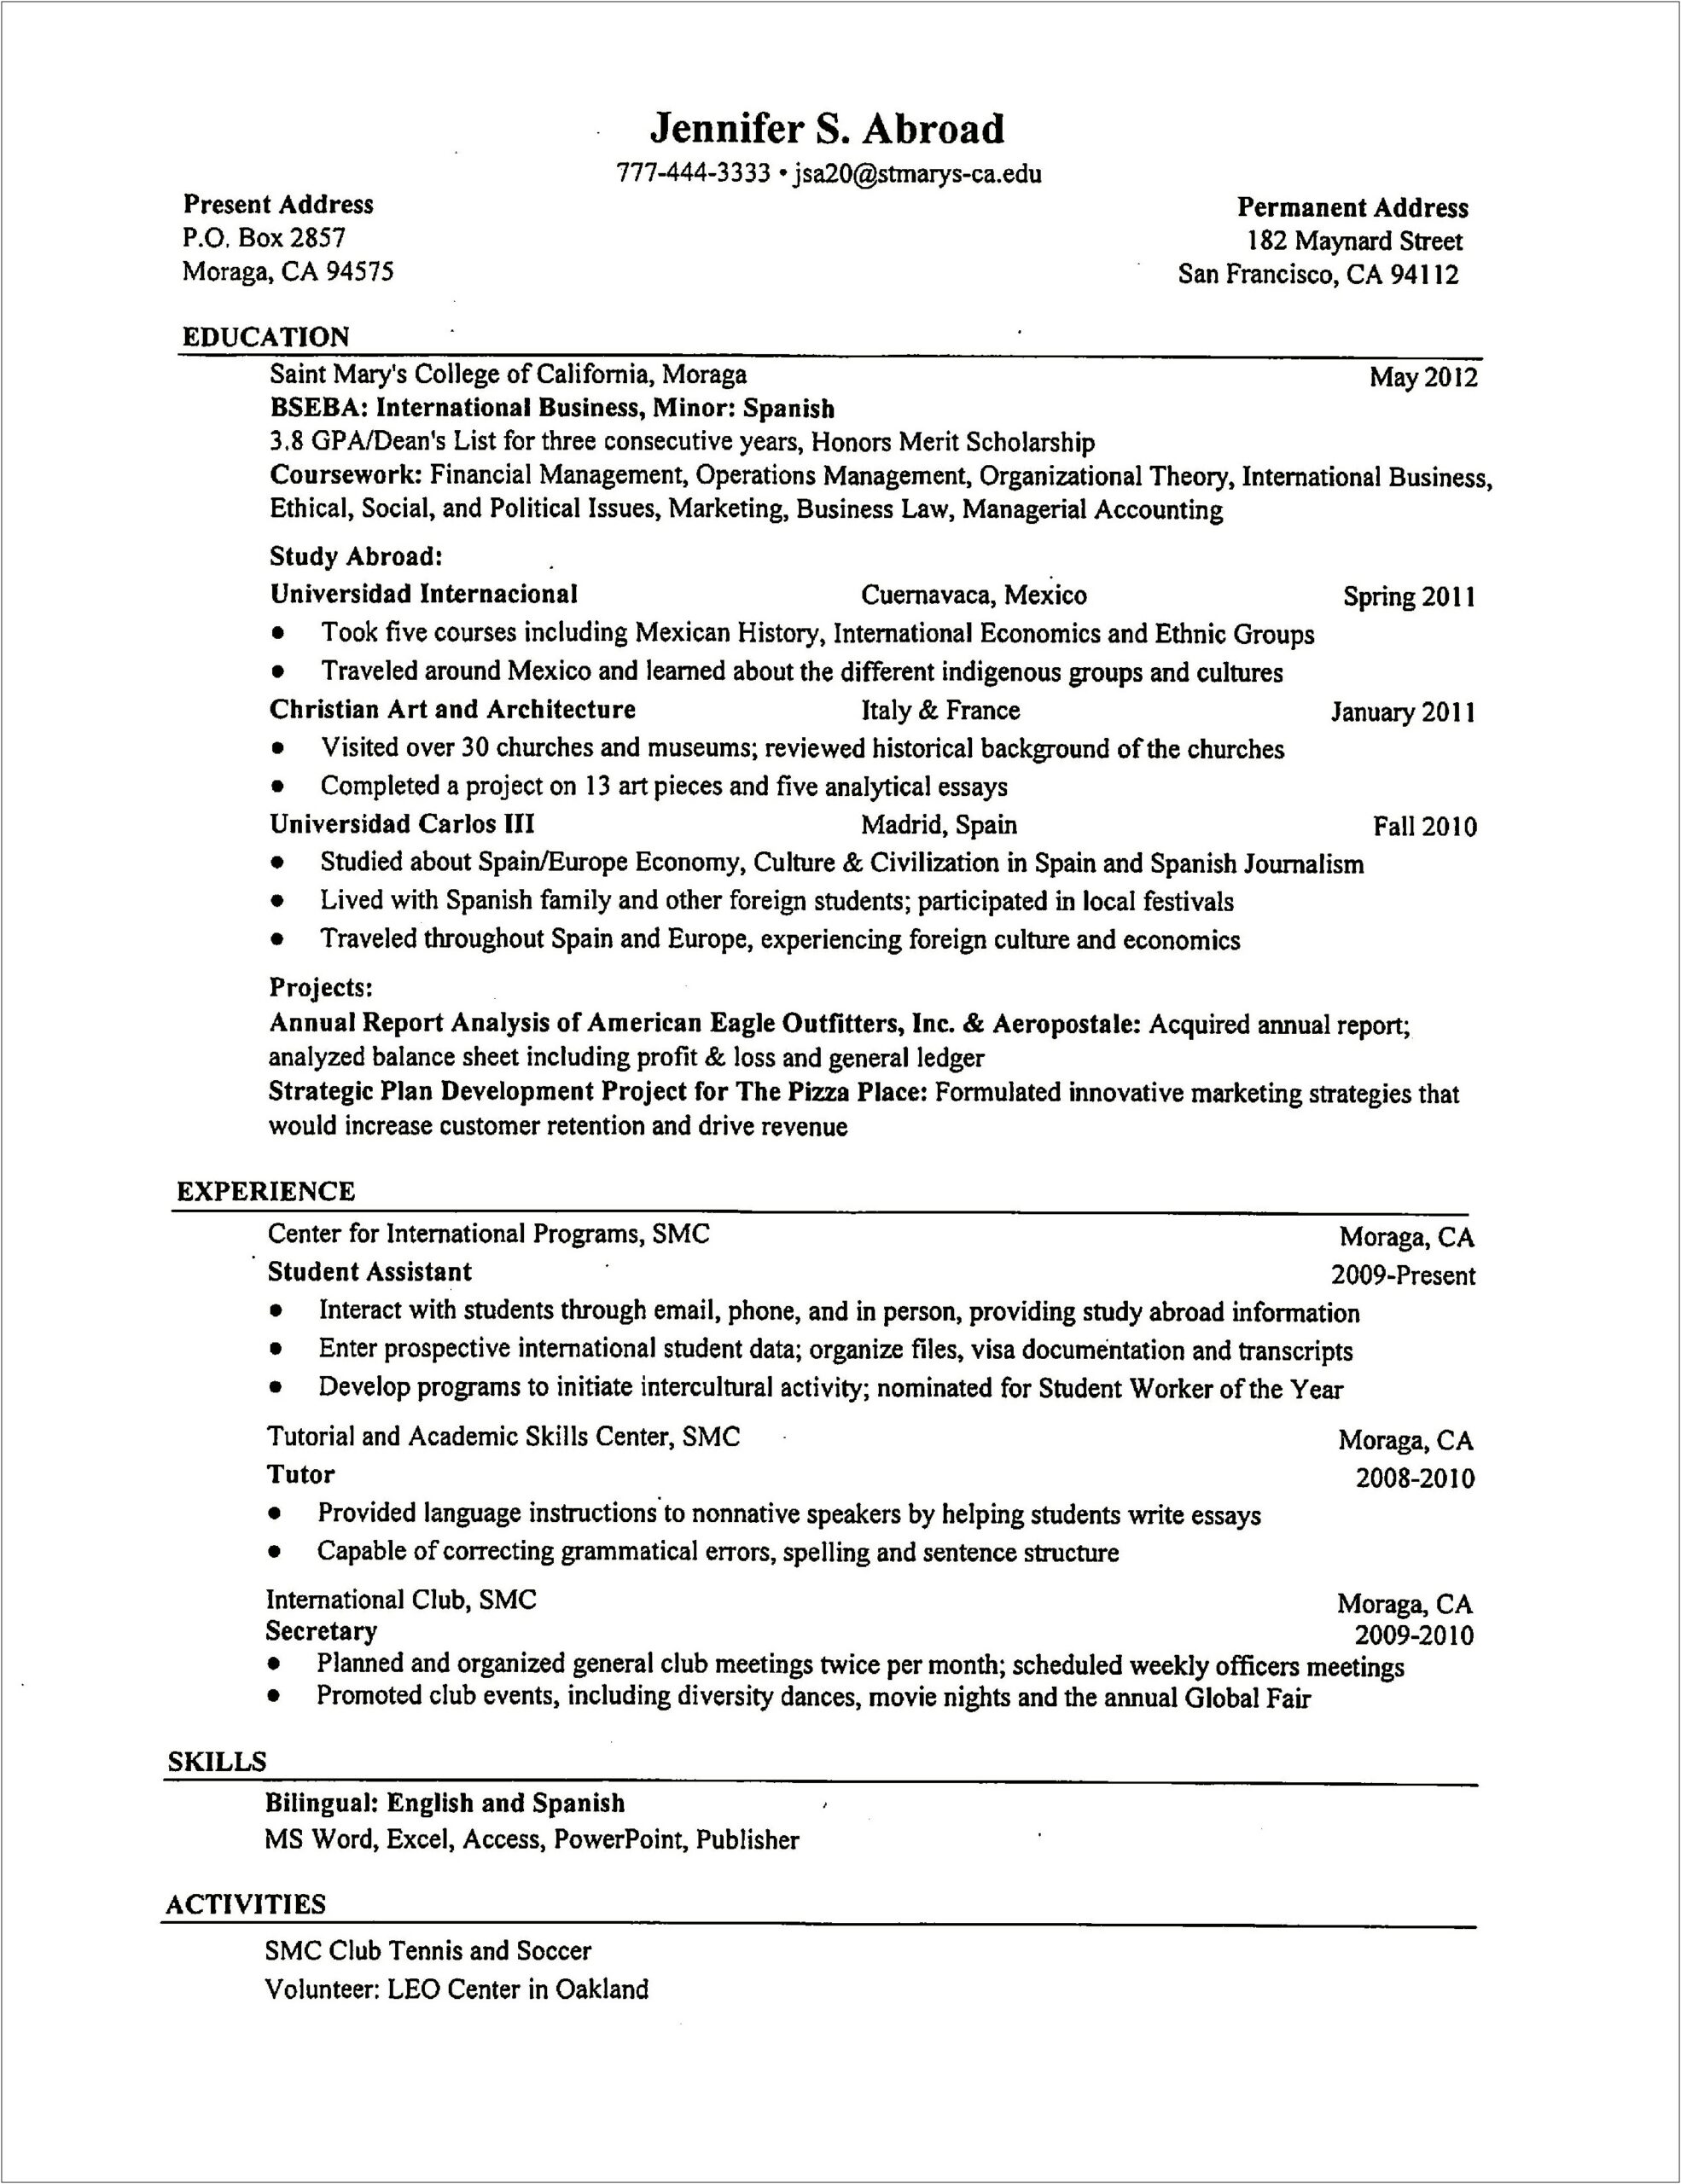 Description For Study Abroad On Resume